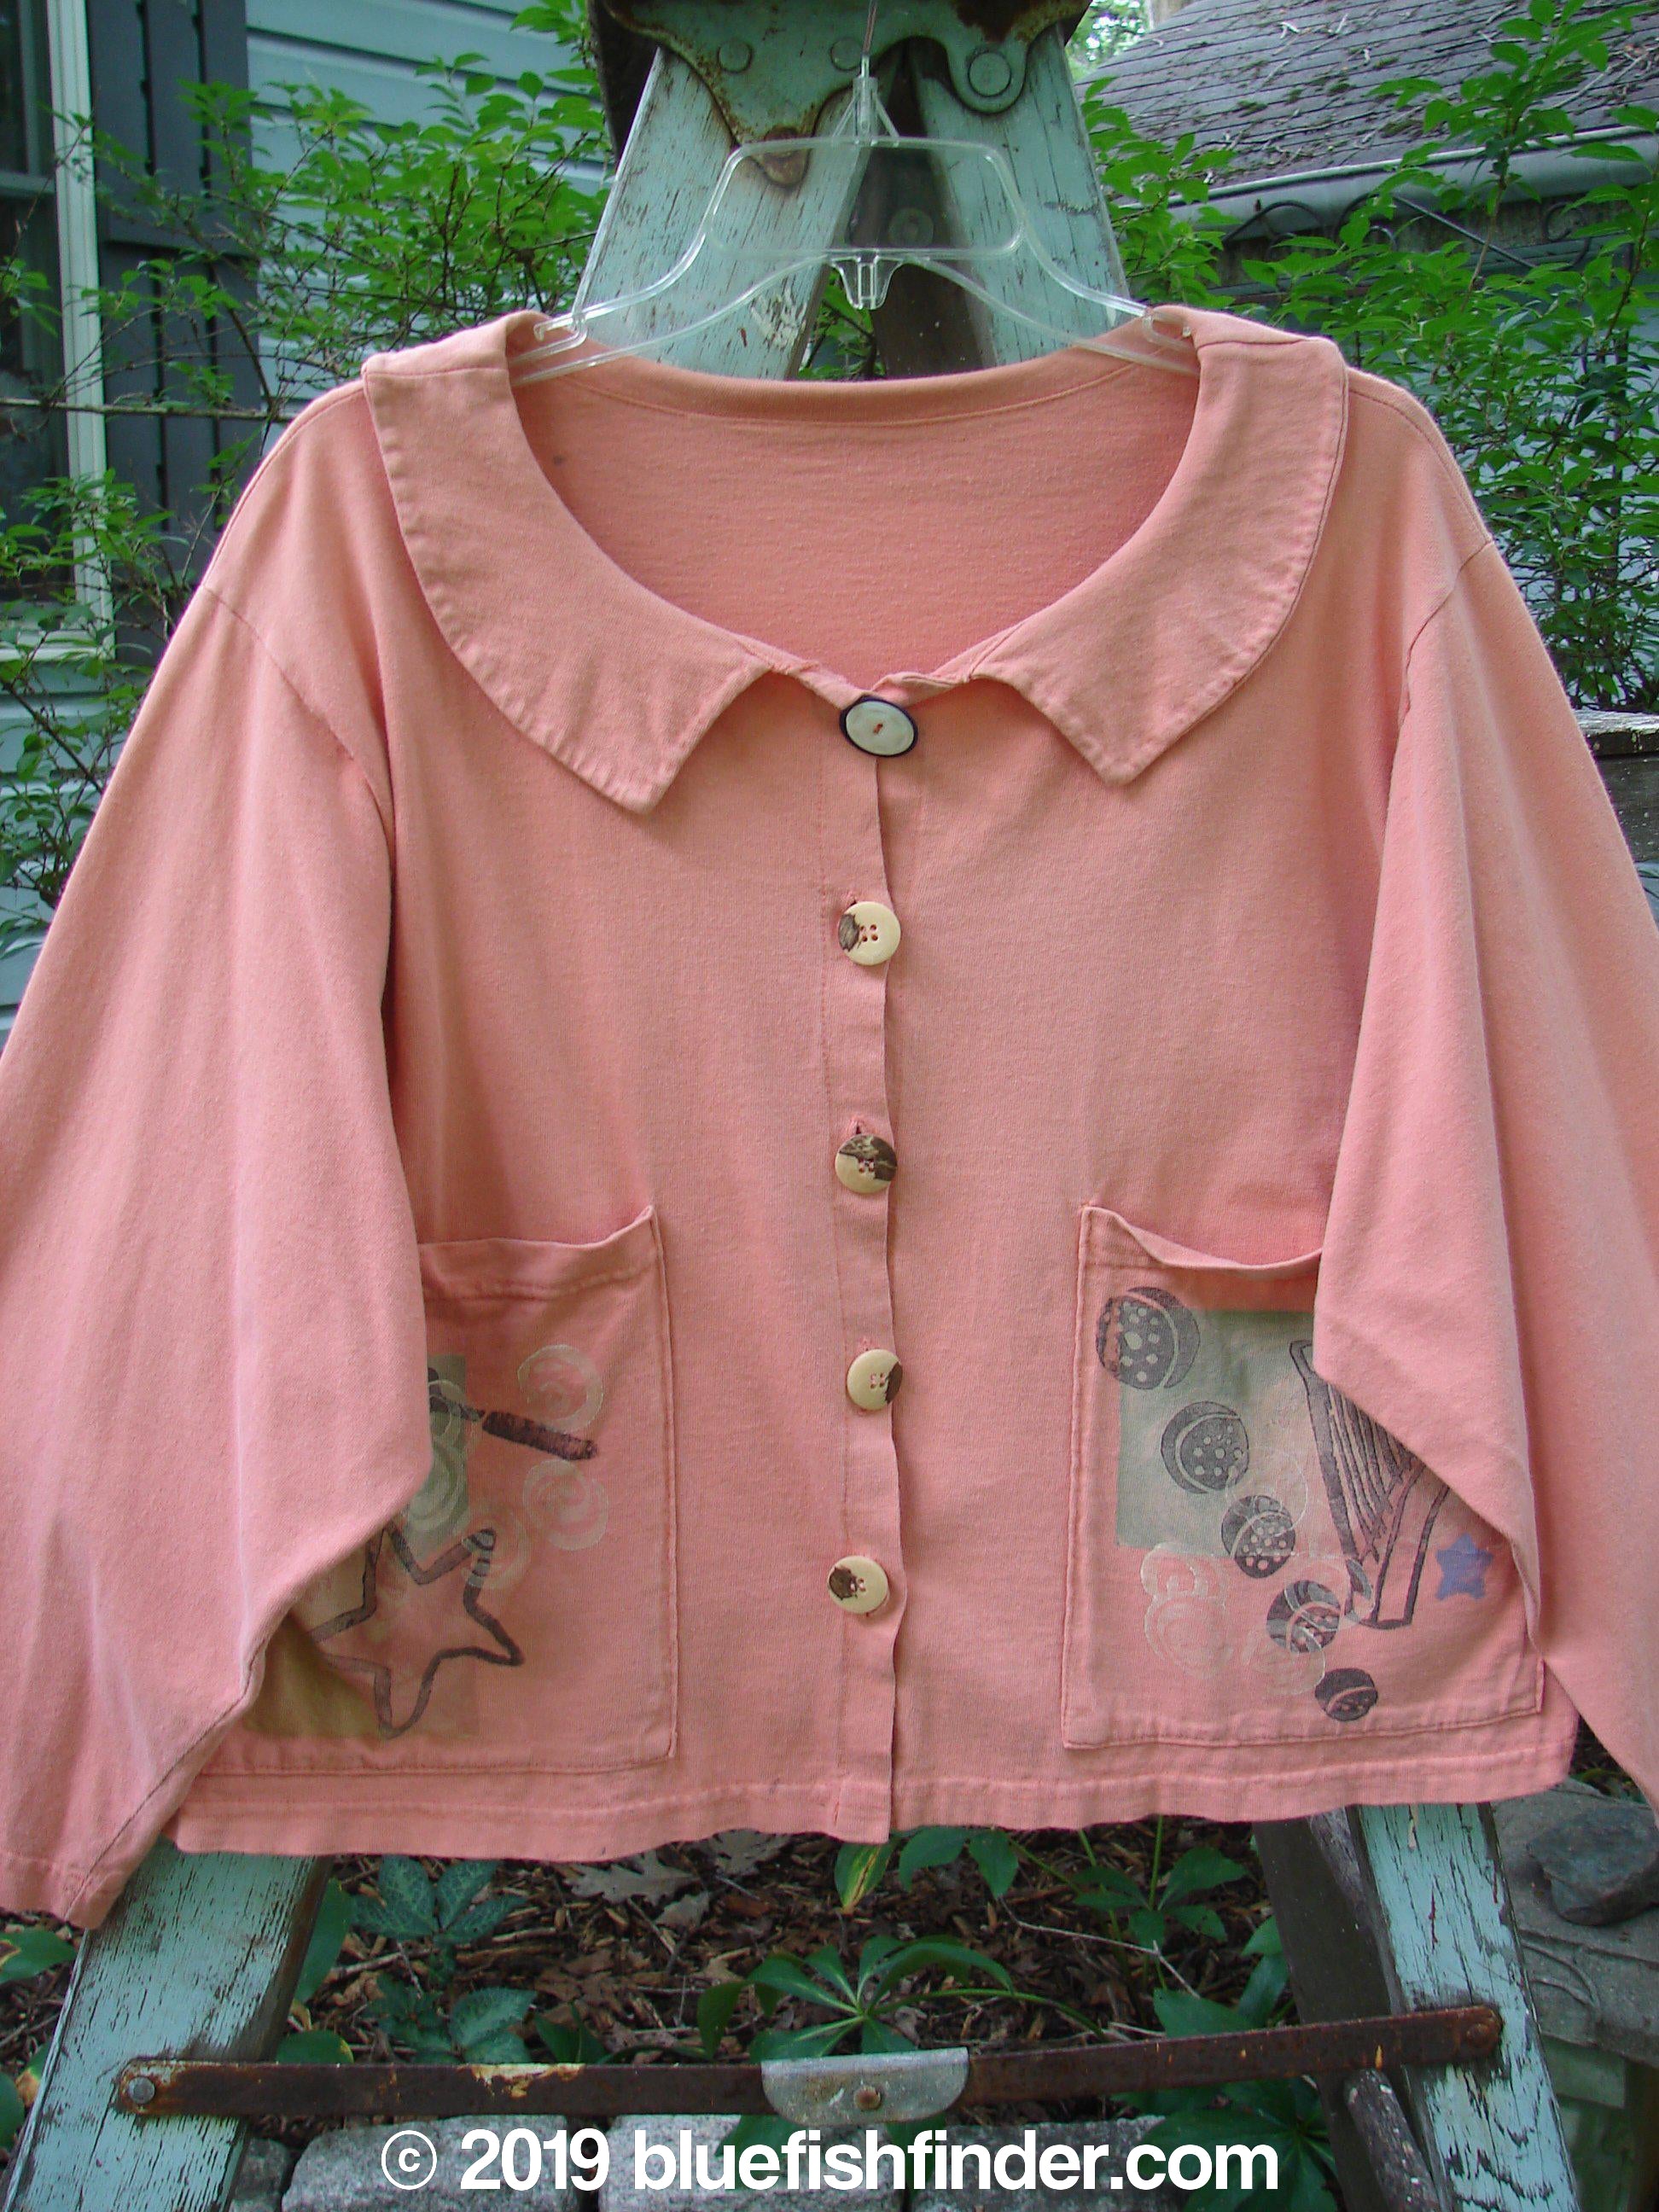 Image alt text: 1994 Box Pocket Jacket Reef Harp Star Size 1 - A pink shirt with buttons on a clothesline, featuring a unique collar, oversized front pockets, and a cropped boxy shape.